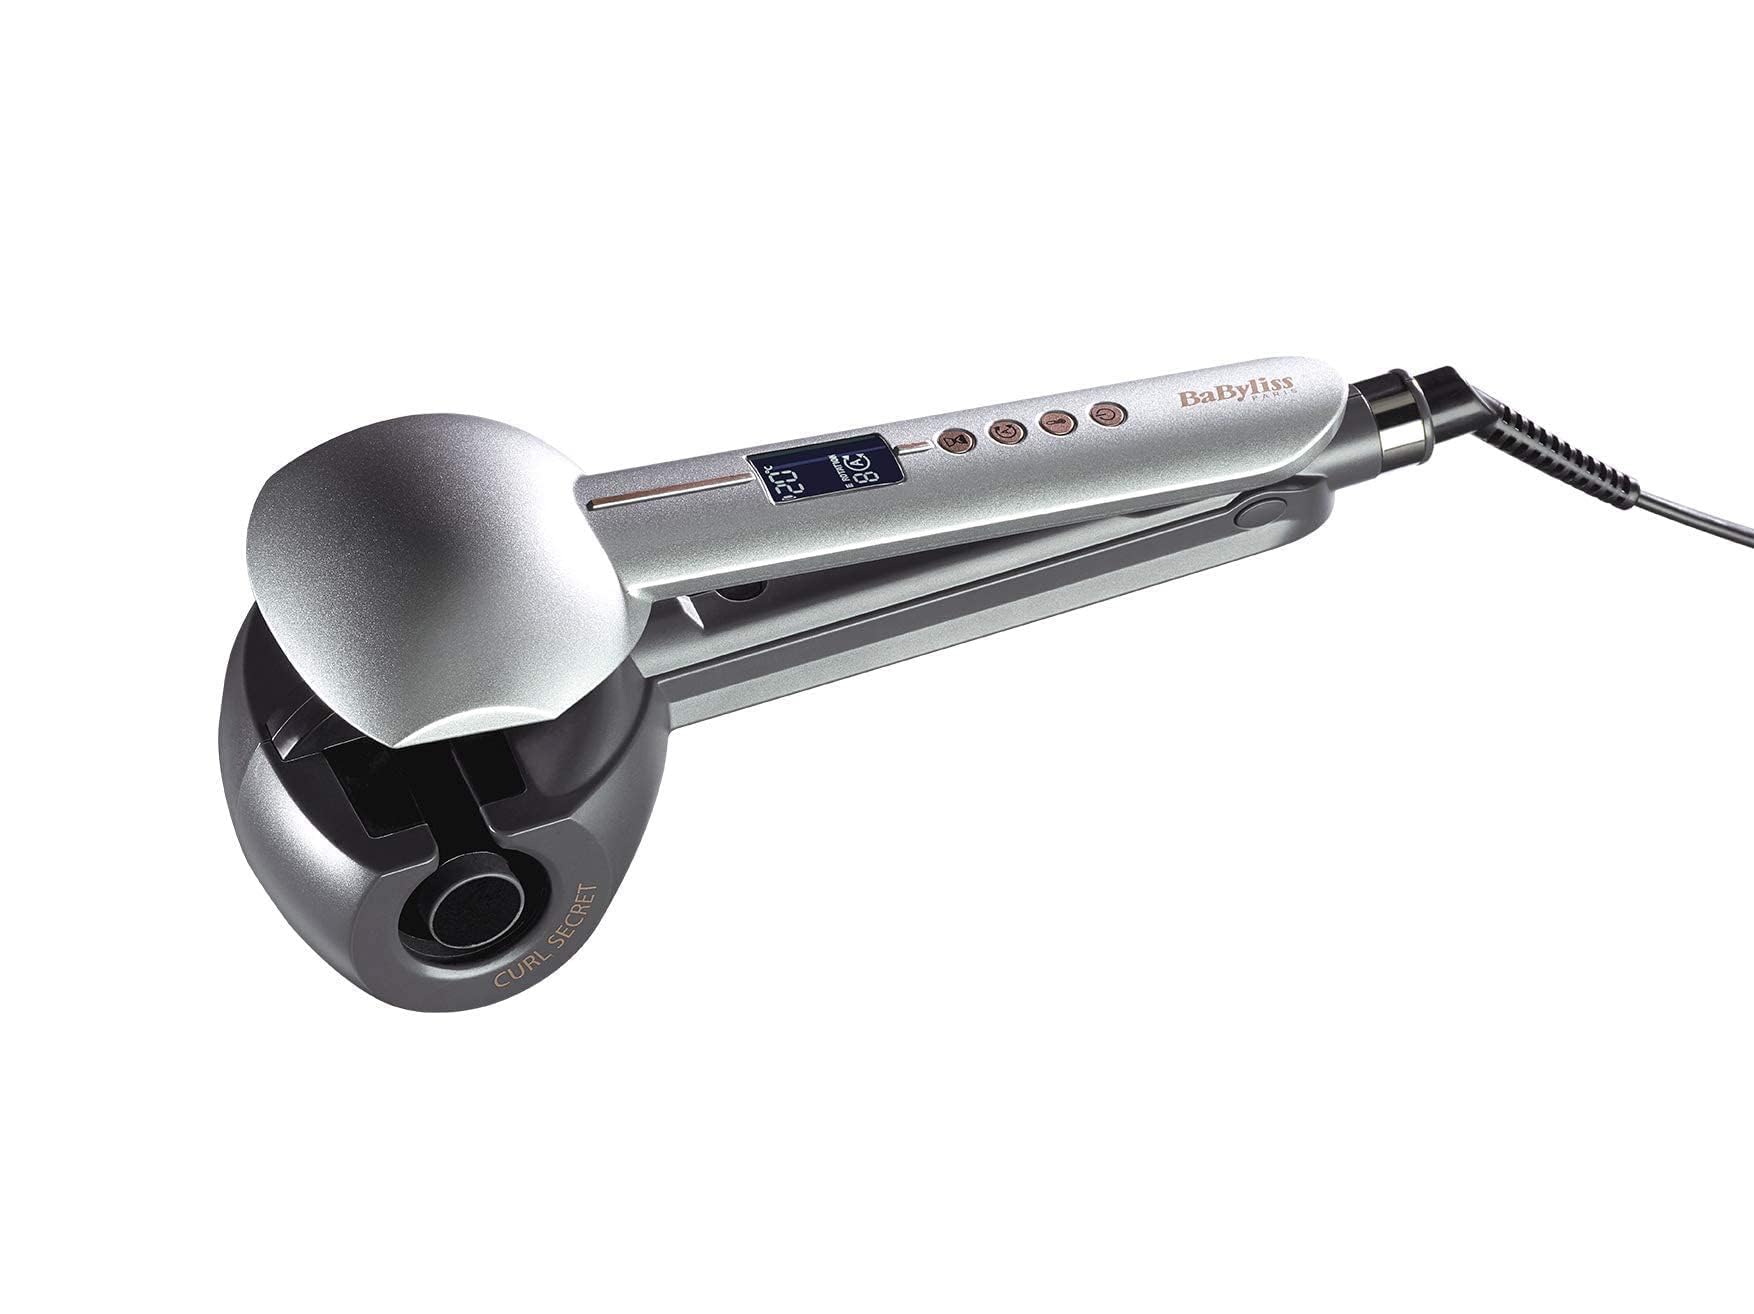 BaByliss Hair Curler| Auto Curling Technology For Effortless Curls| Optimum Ionic And Ceramic Technology| Fast And Efficient Curling Performance & Salon-quality Results At Home | C1600SDE(Silver )